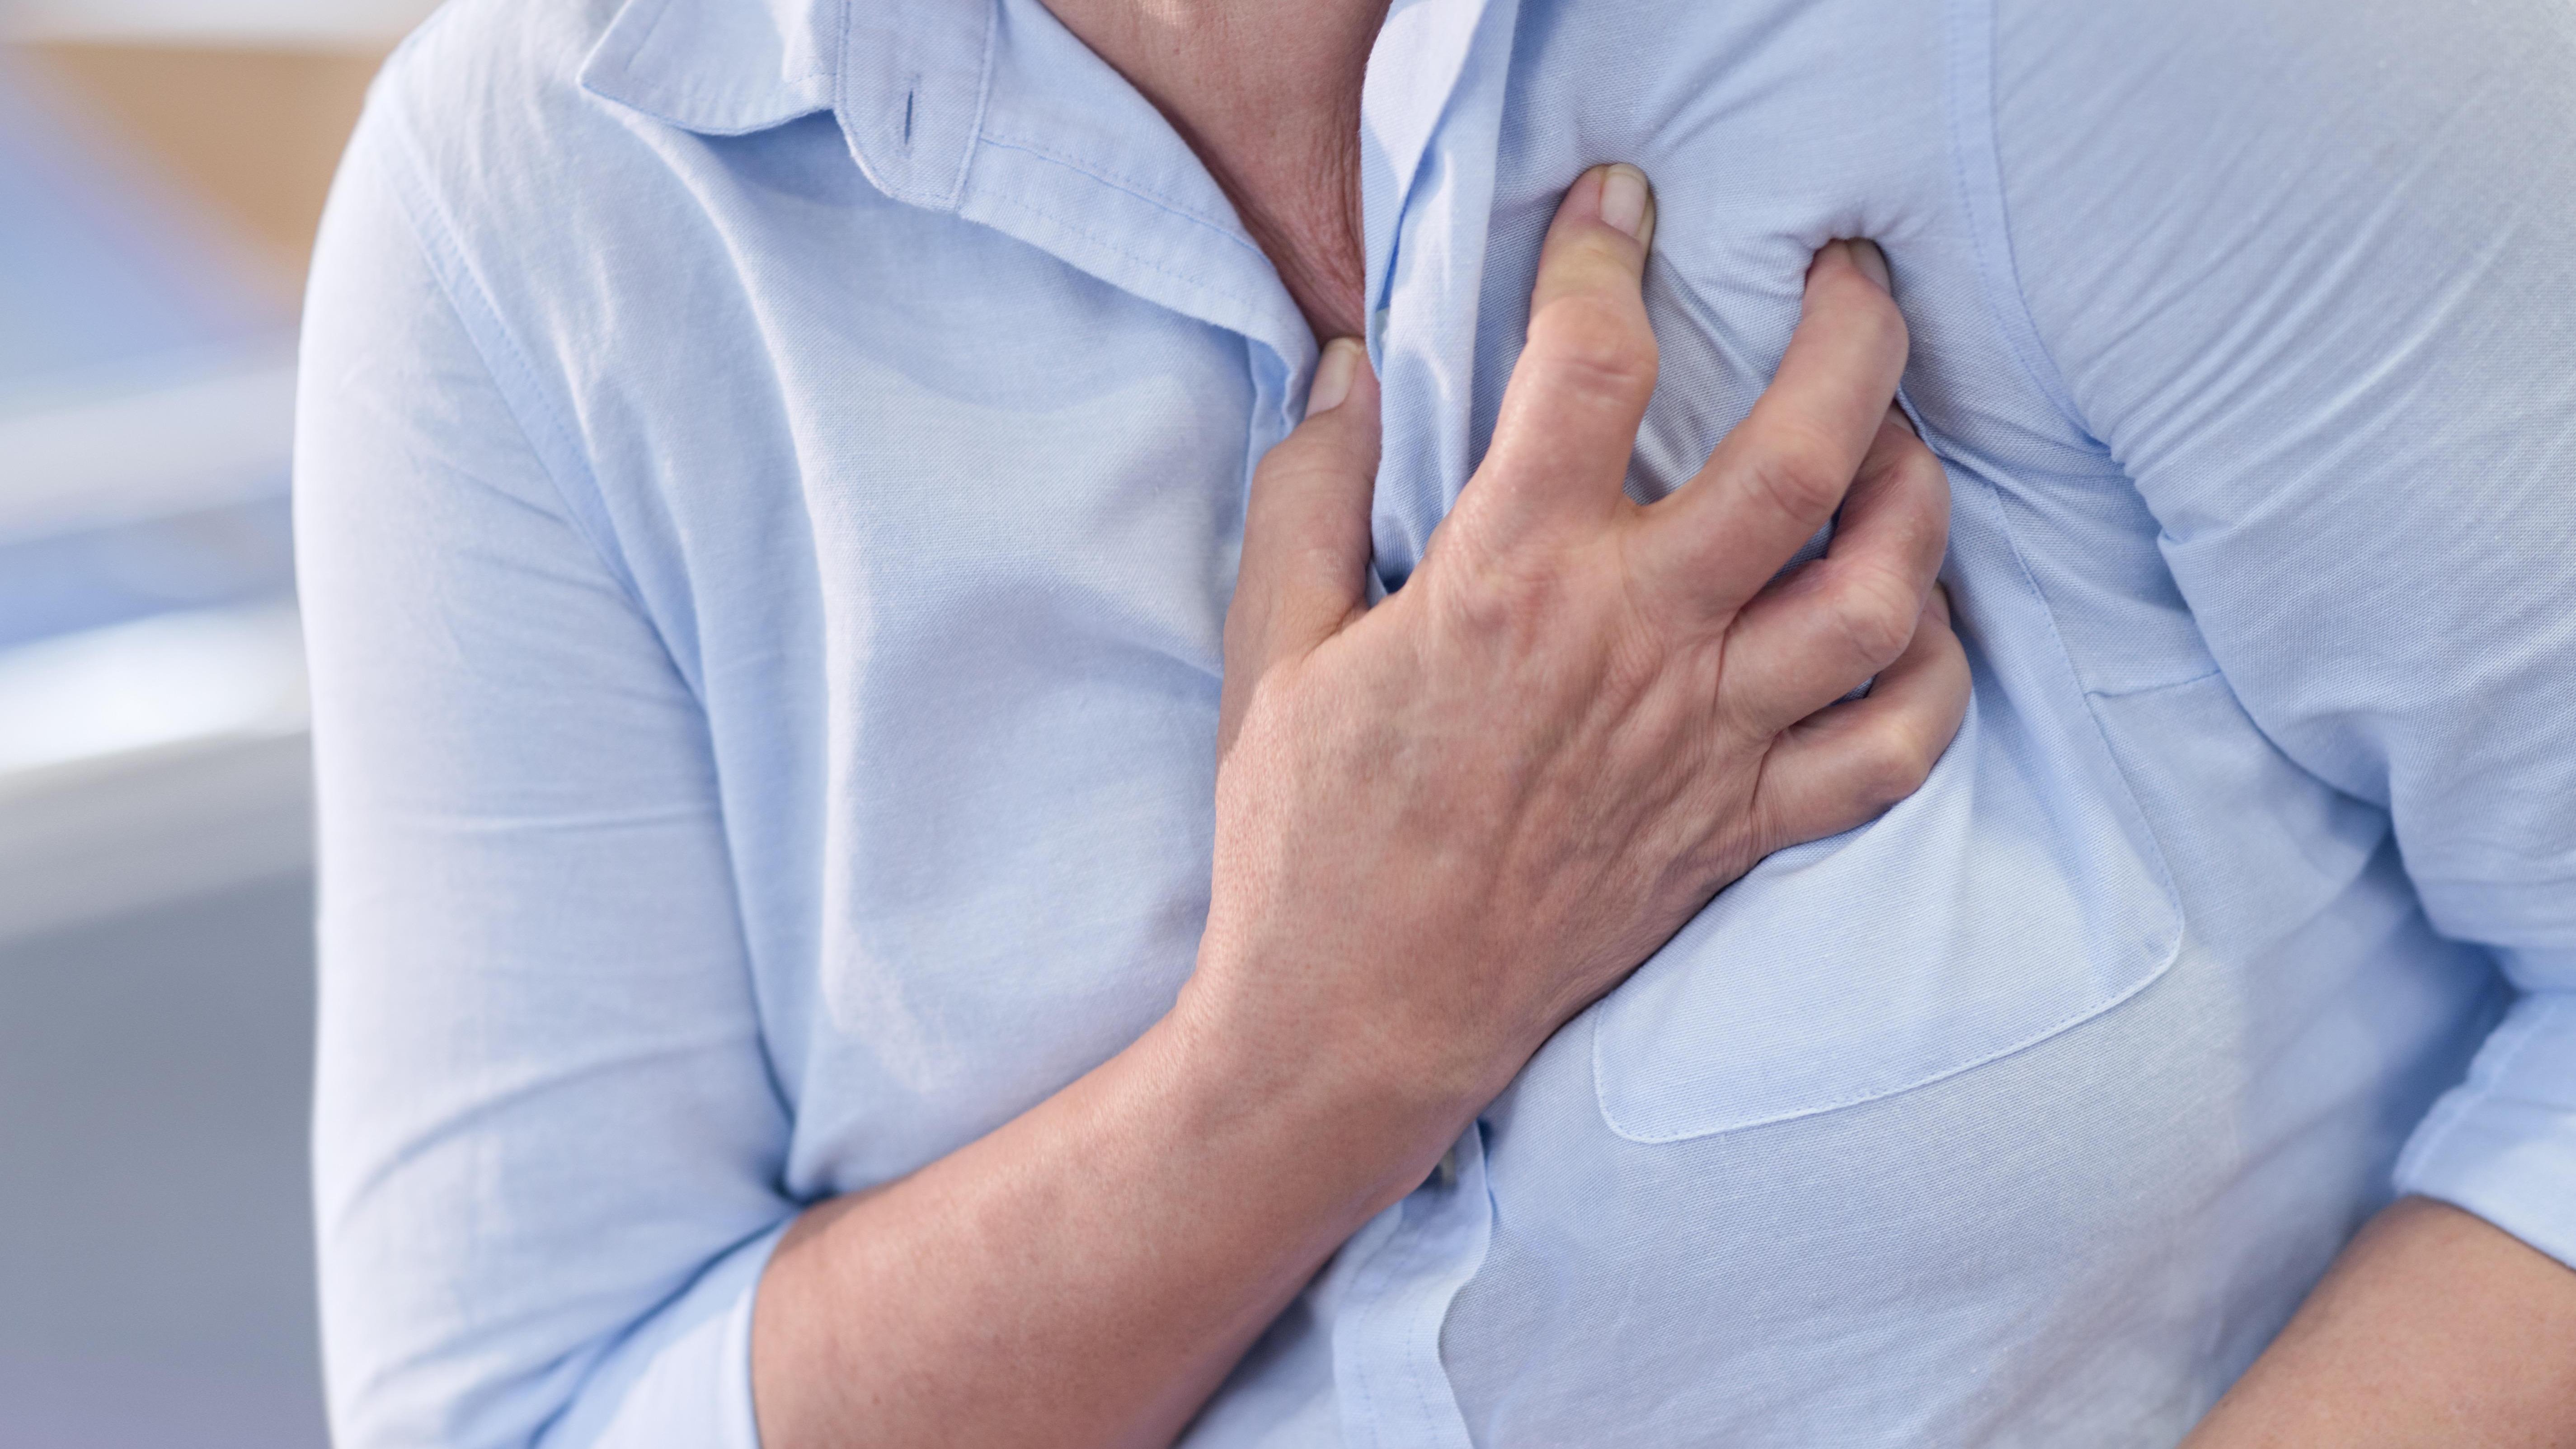 Mystery rise in heart attacks from blocked arteries